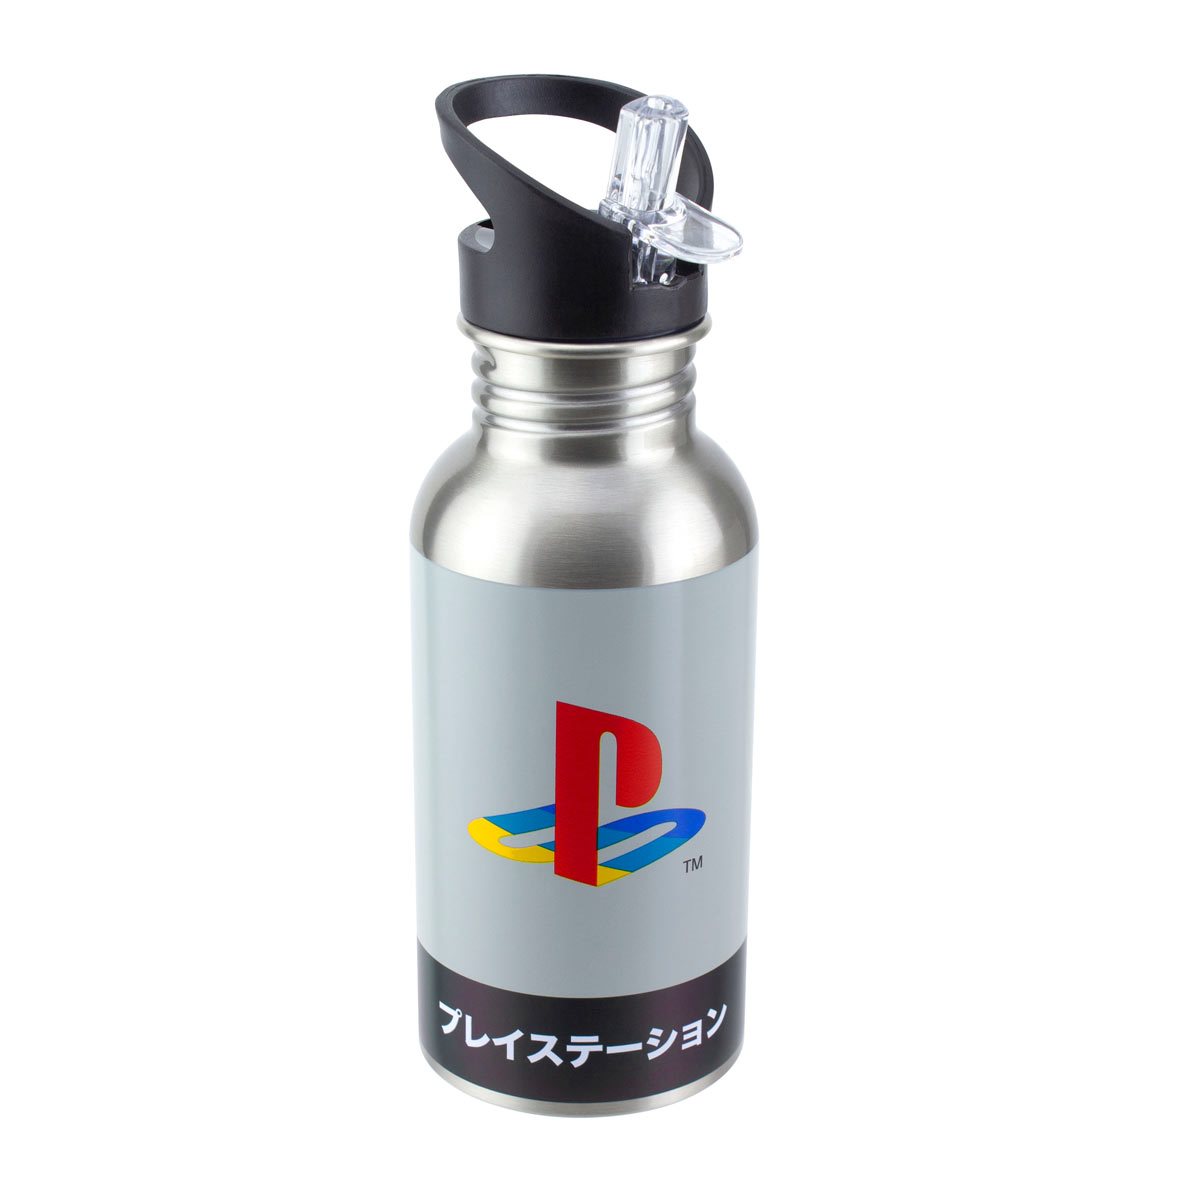 PlayStation Heritage 16 oz. Metal Water Bottle with Straw